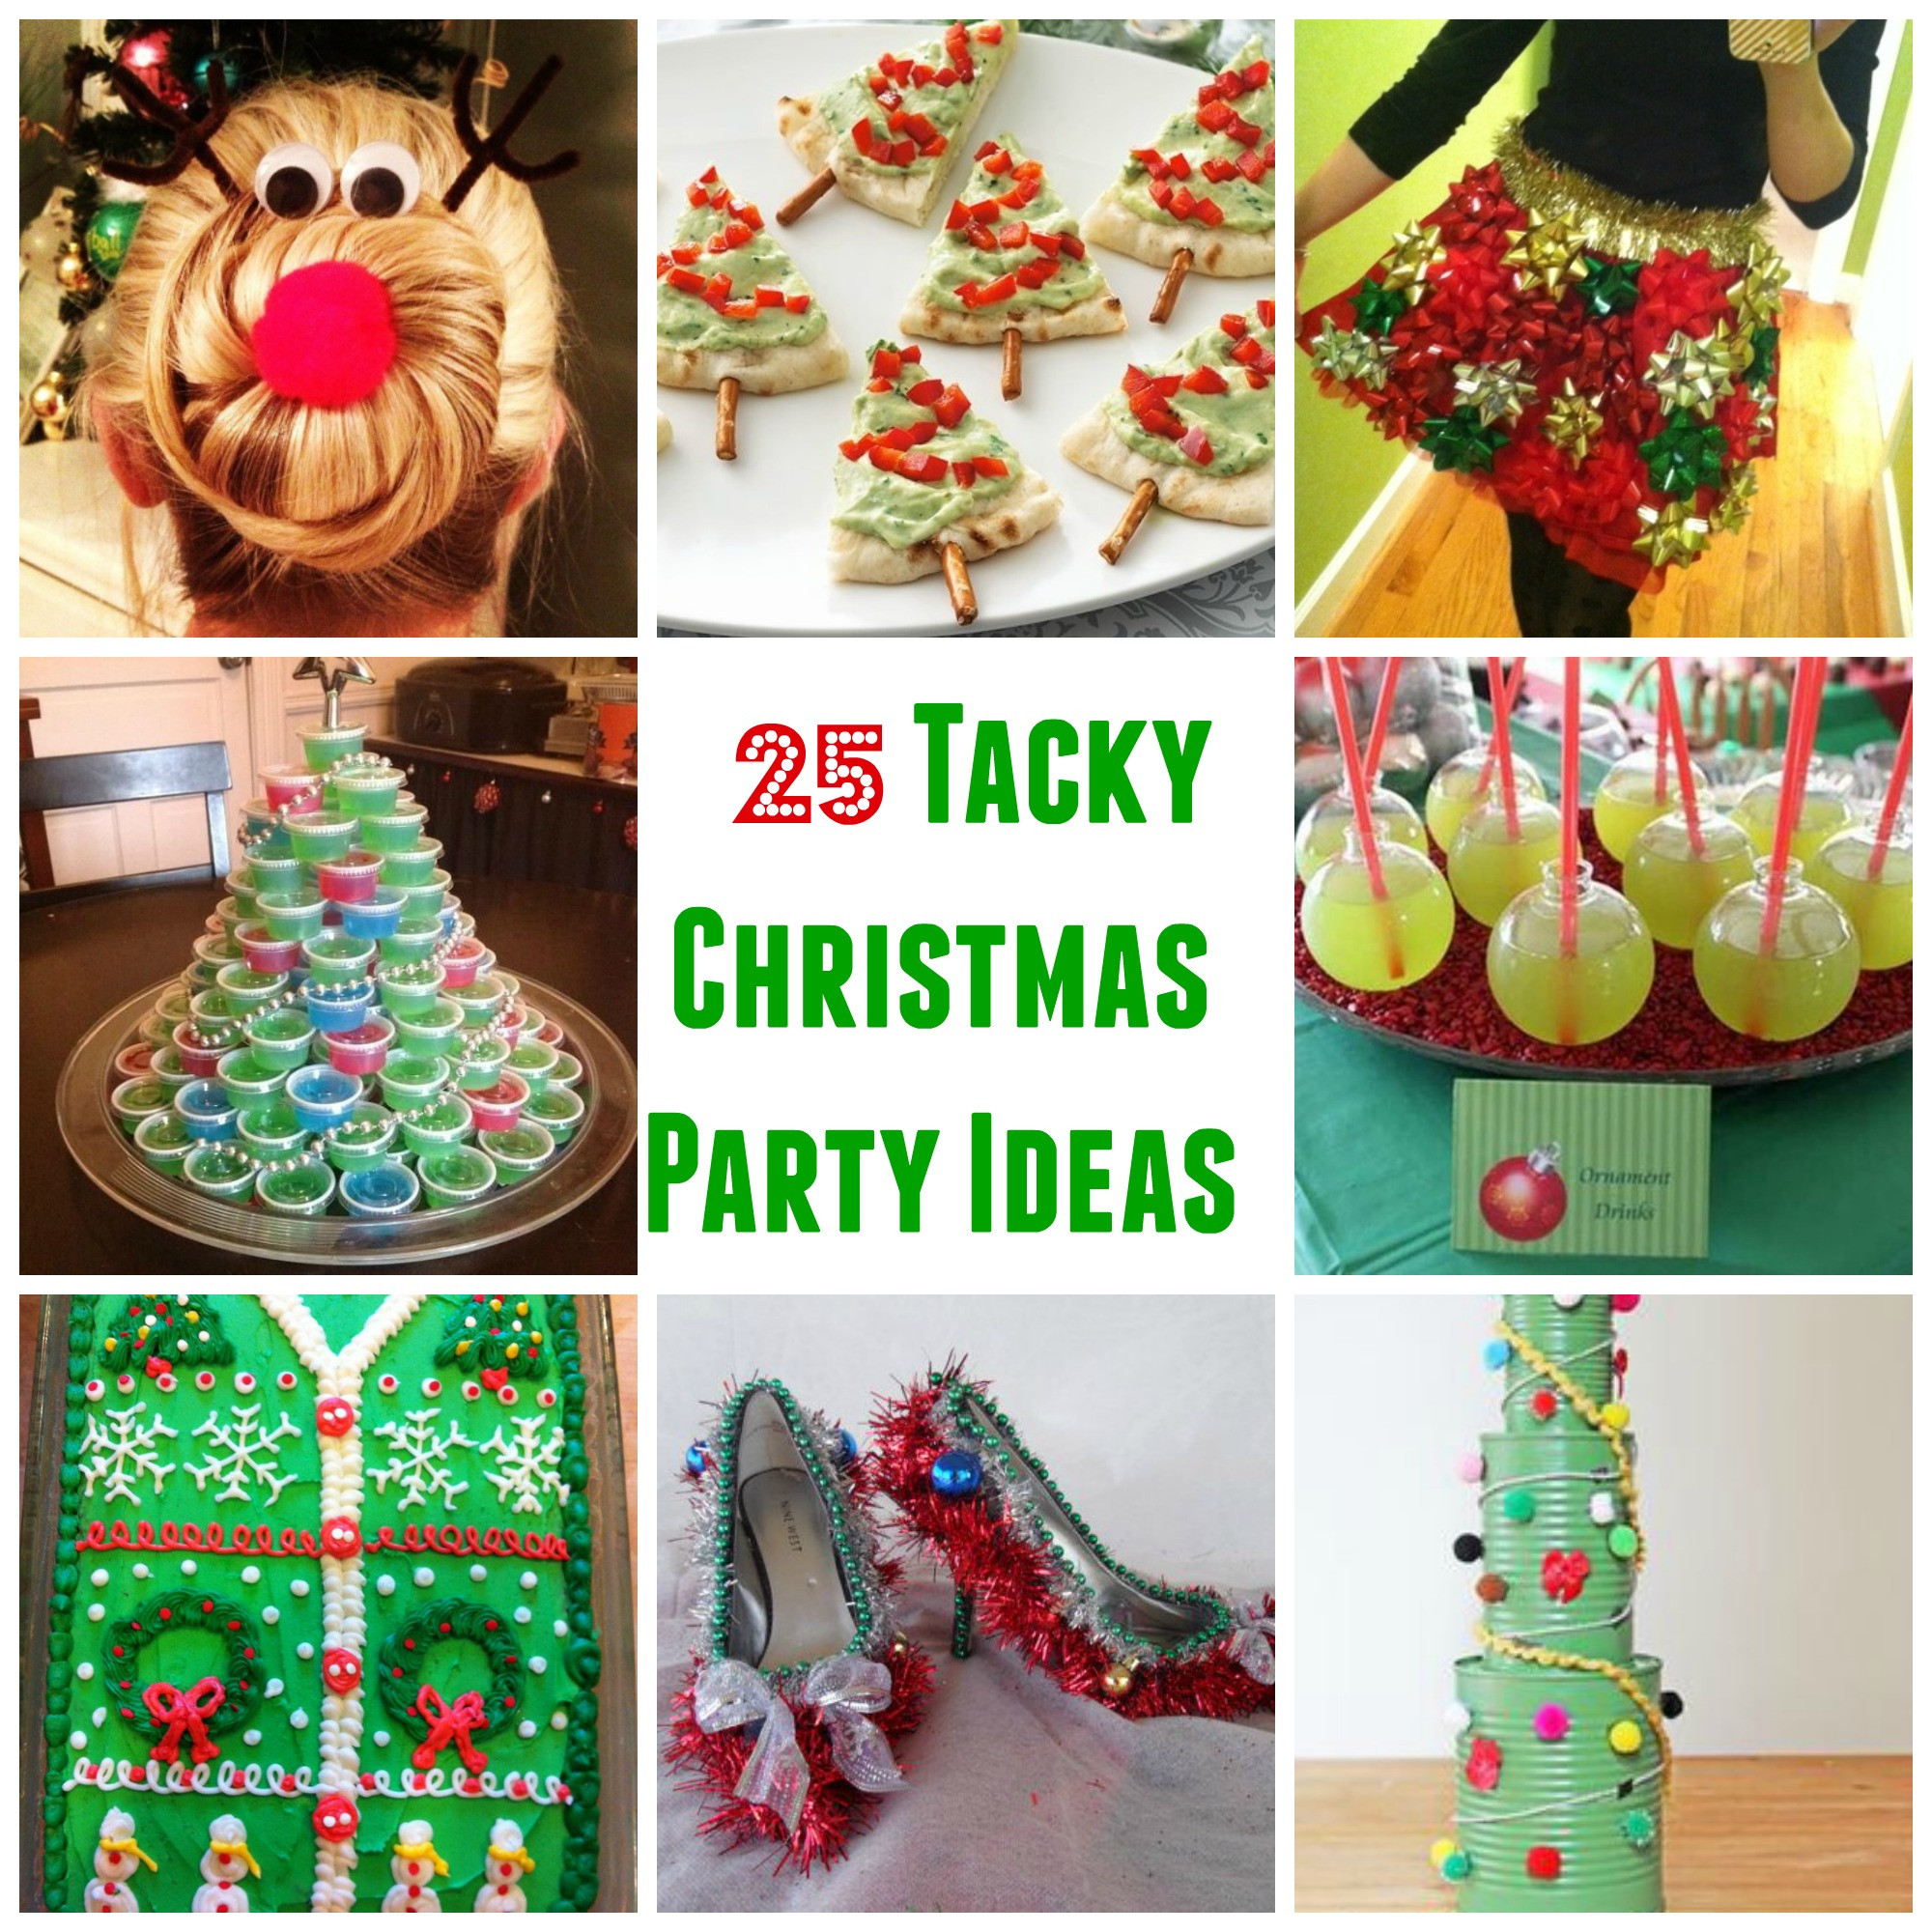 Ugly Christmas Party Ideas
 25 Genius Tacky Christmas Party Ideas Sarah Scoop